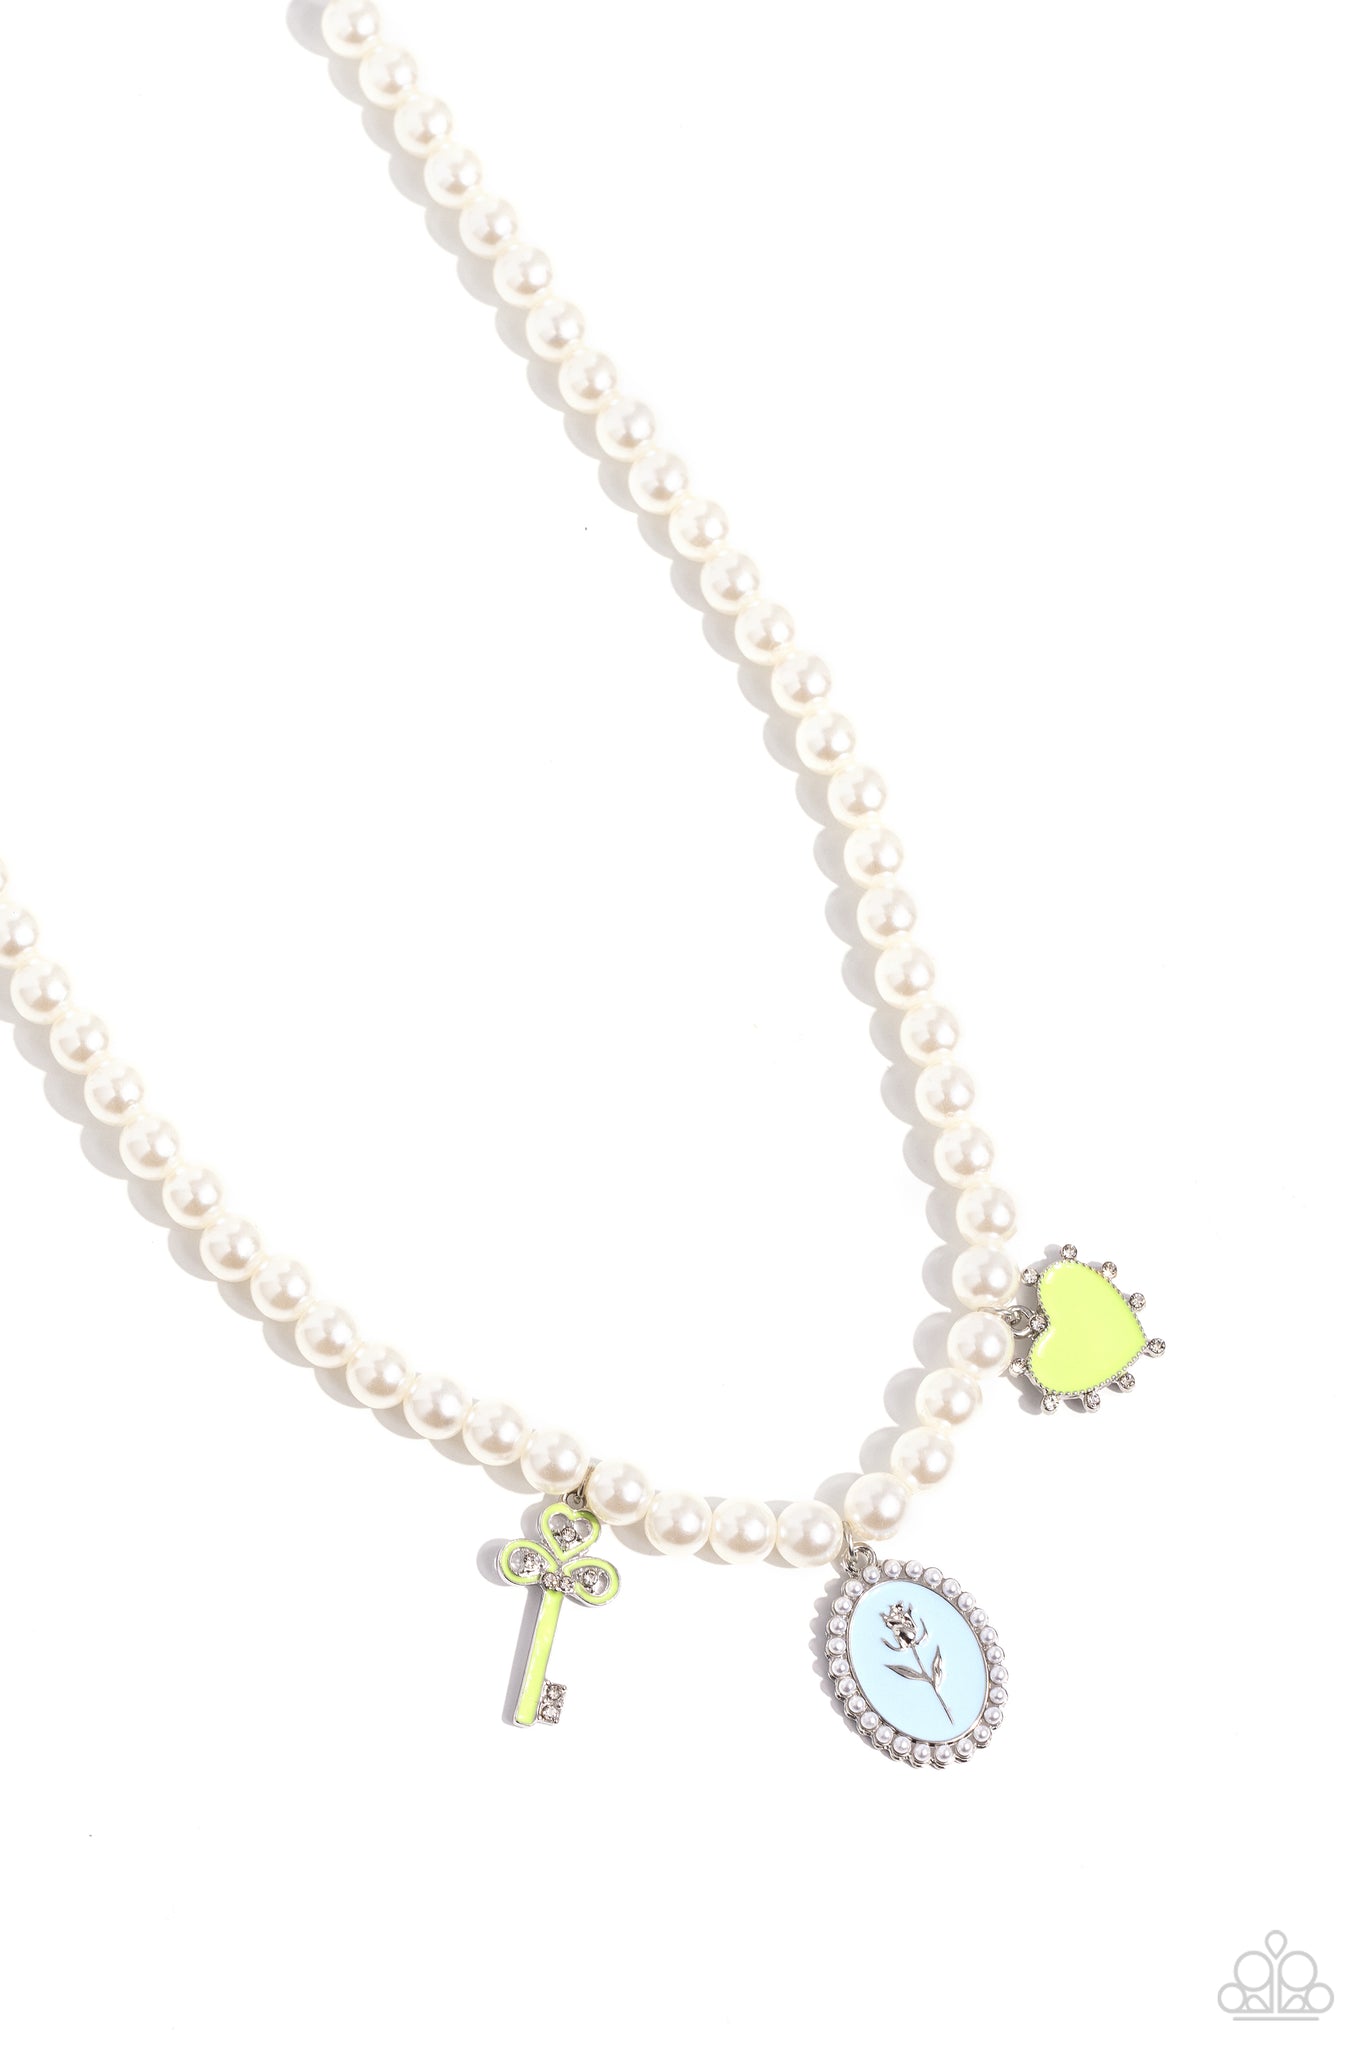 Charming Collision Necklace (Black, Multi, Green)